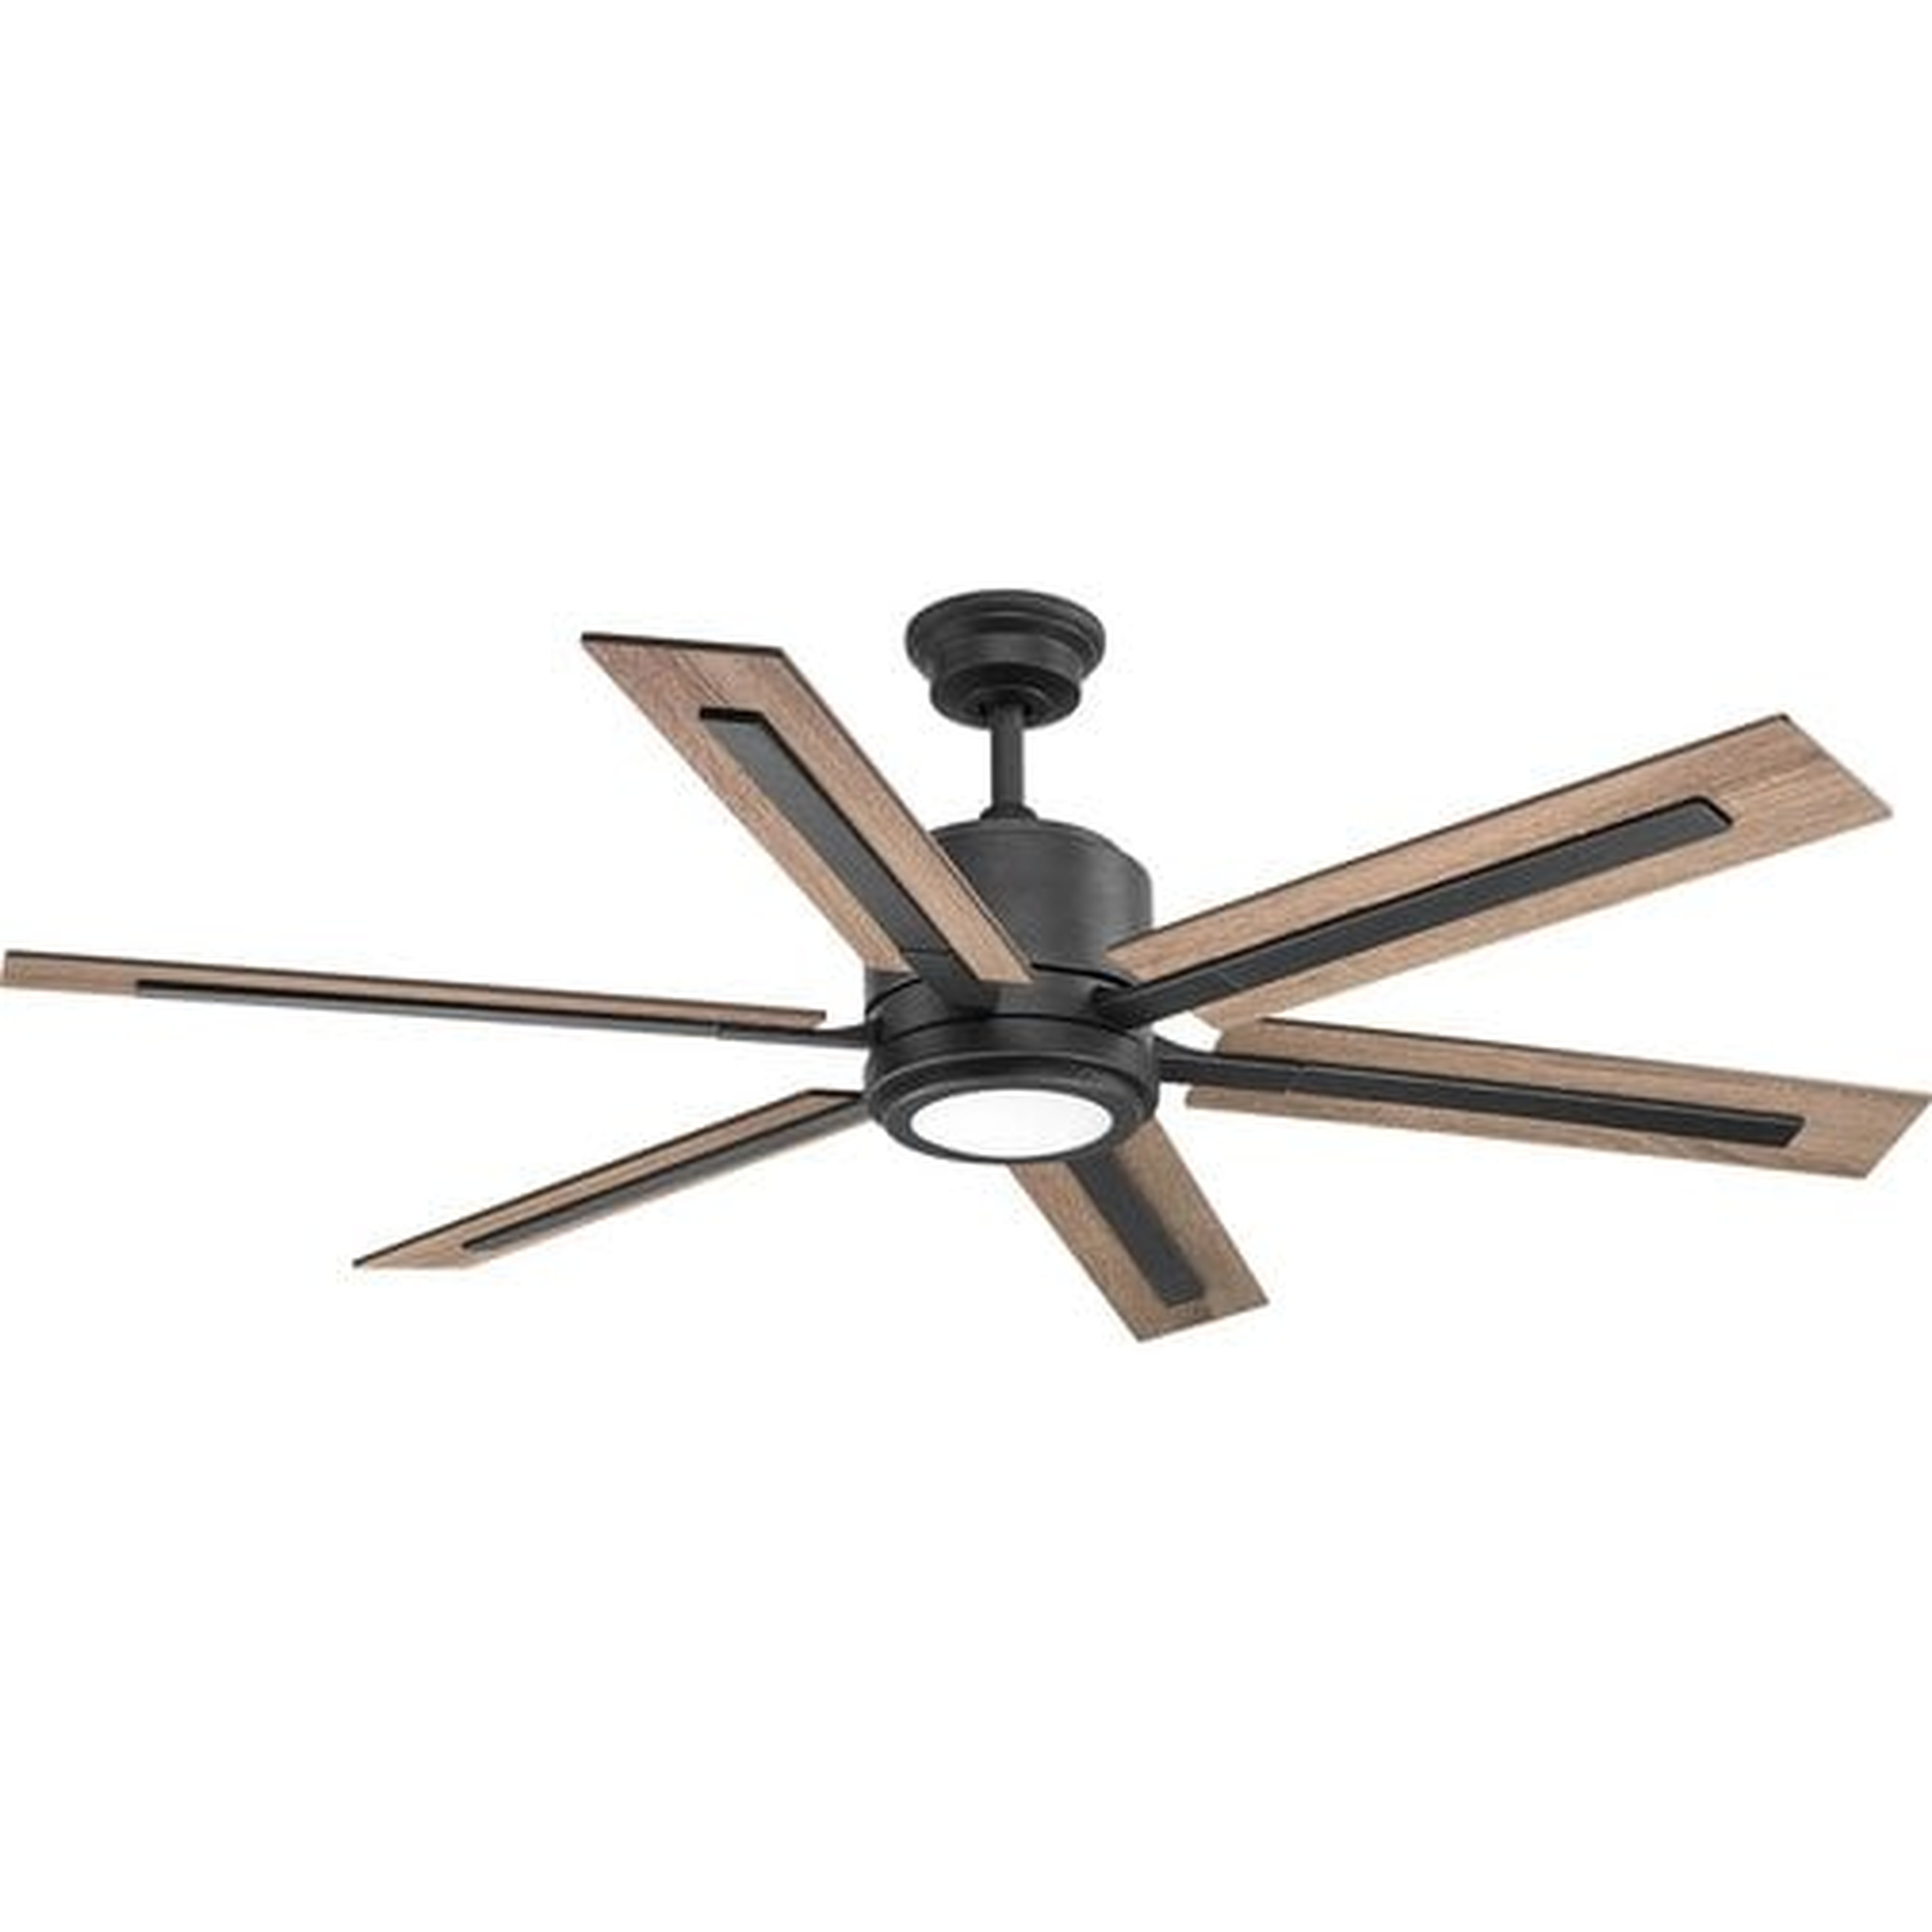 Lesure 6 Blade LED Ceiling Fan with Remote - Birch Lane